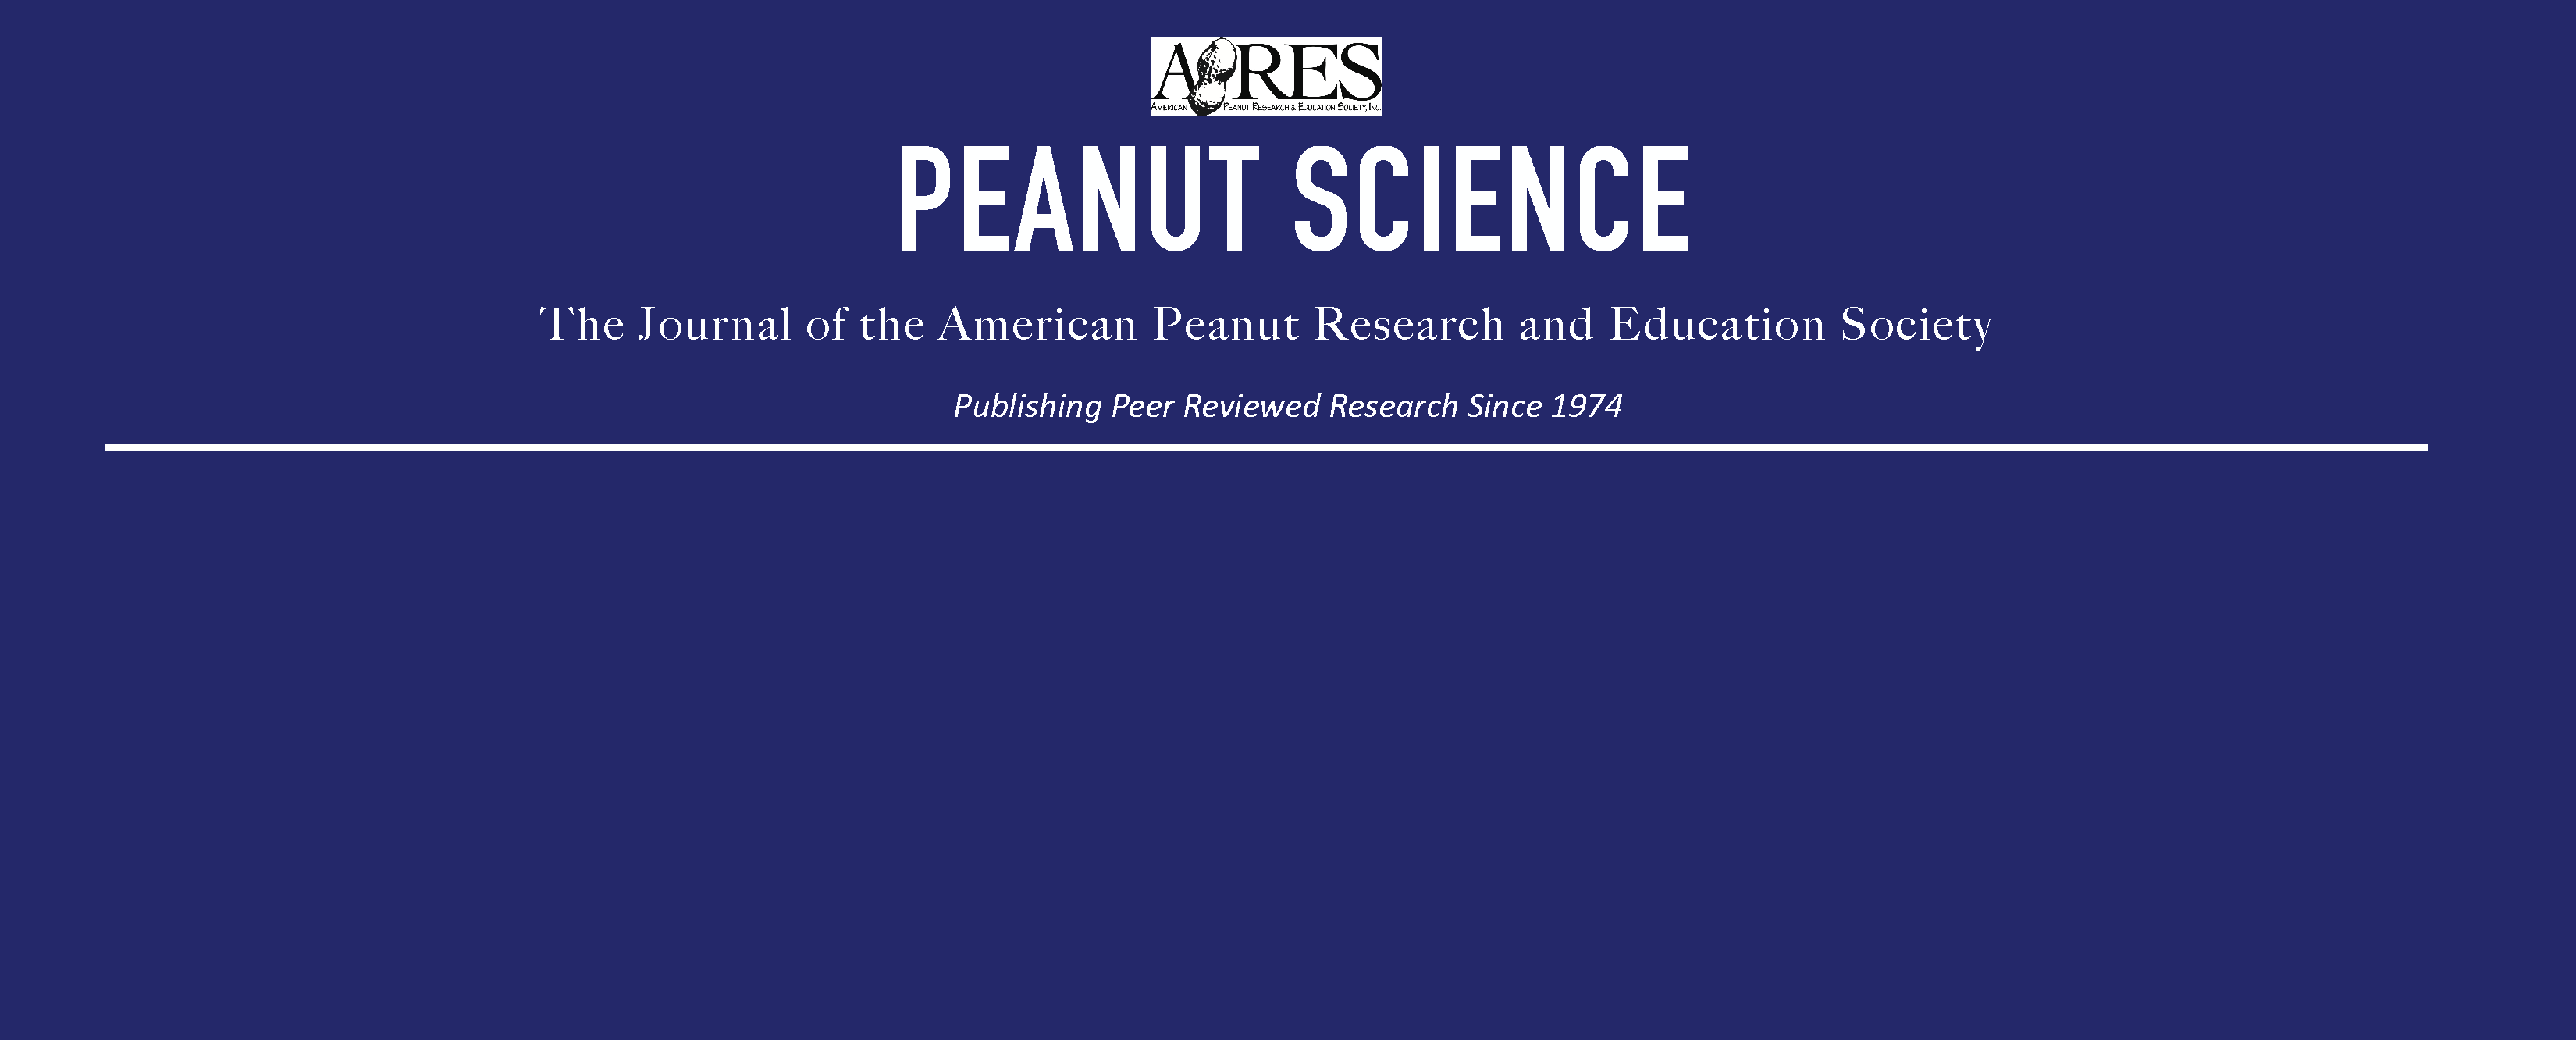 Pod Yield Response of Two Runner Peanut Cultivars to Seeding Rate and Irrigation¹